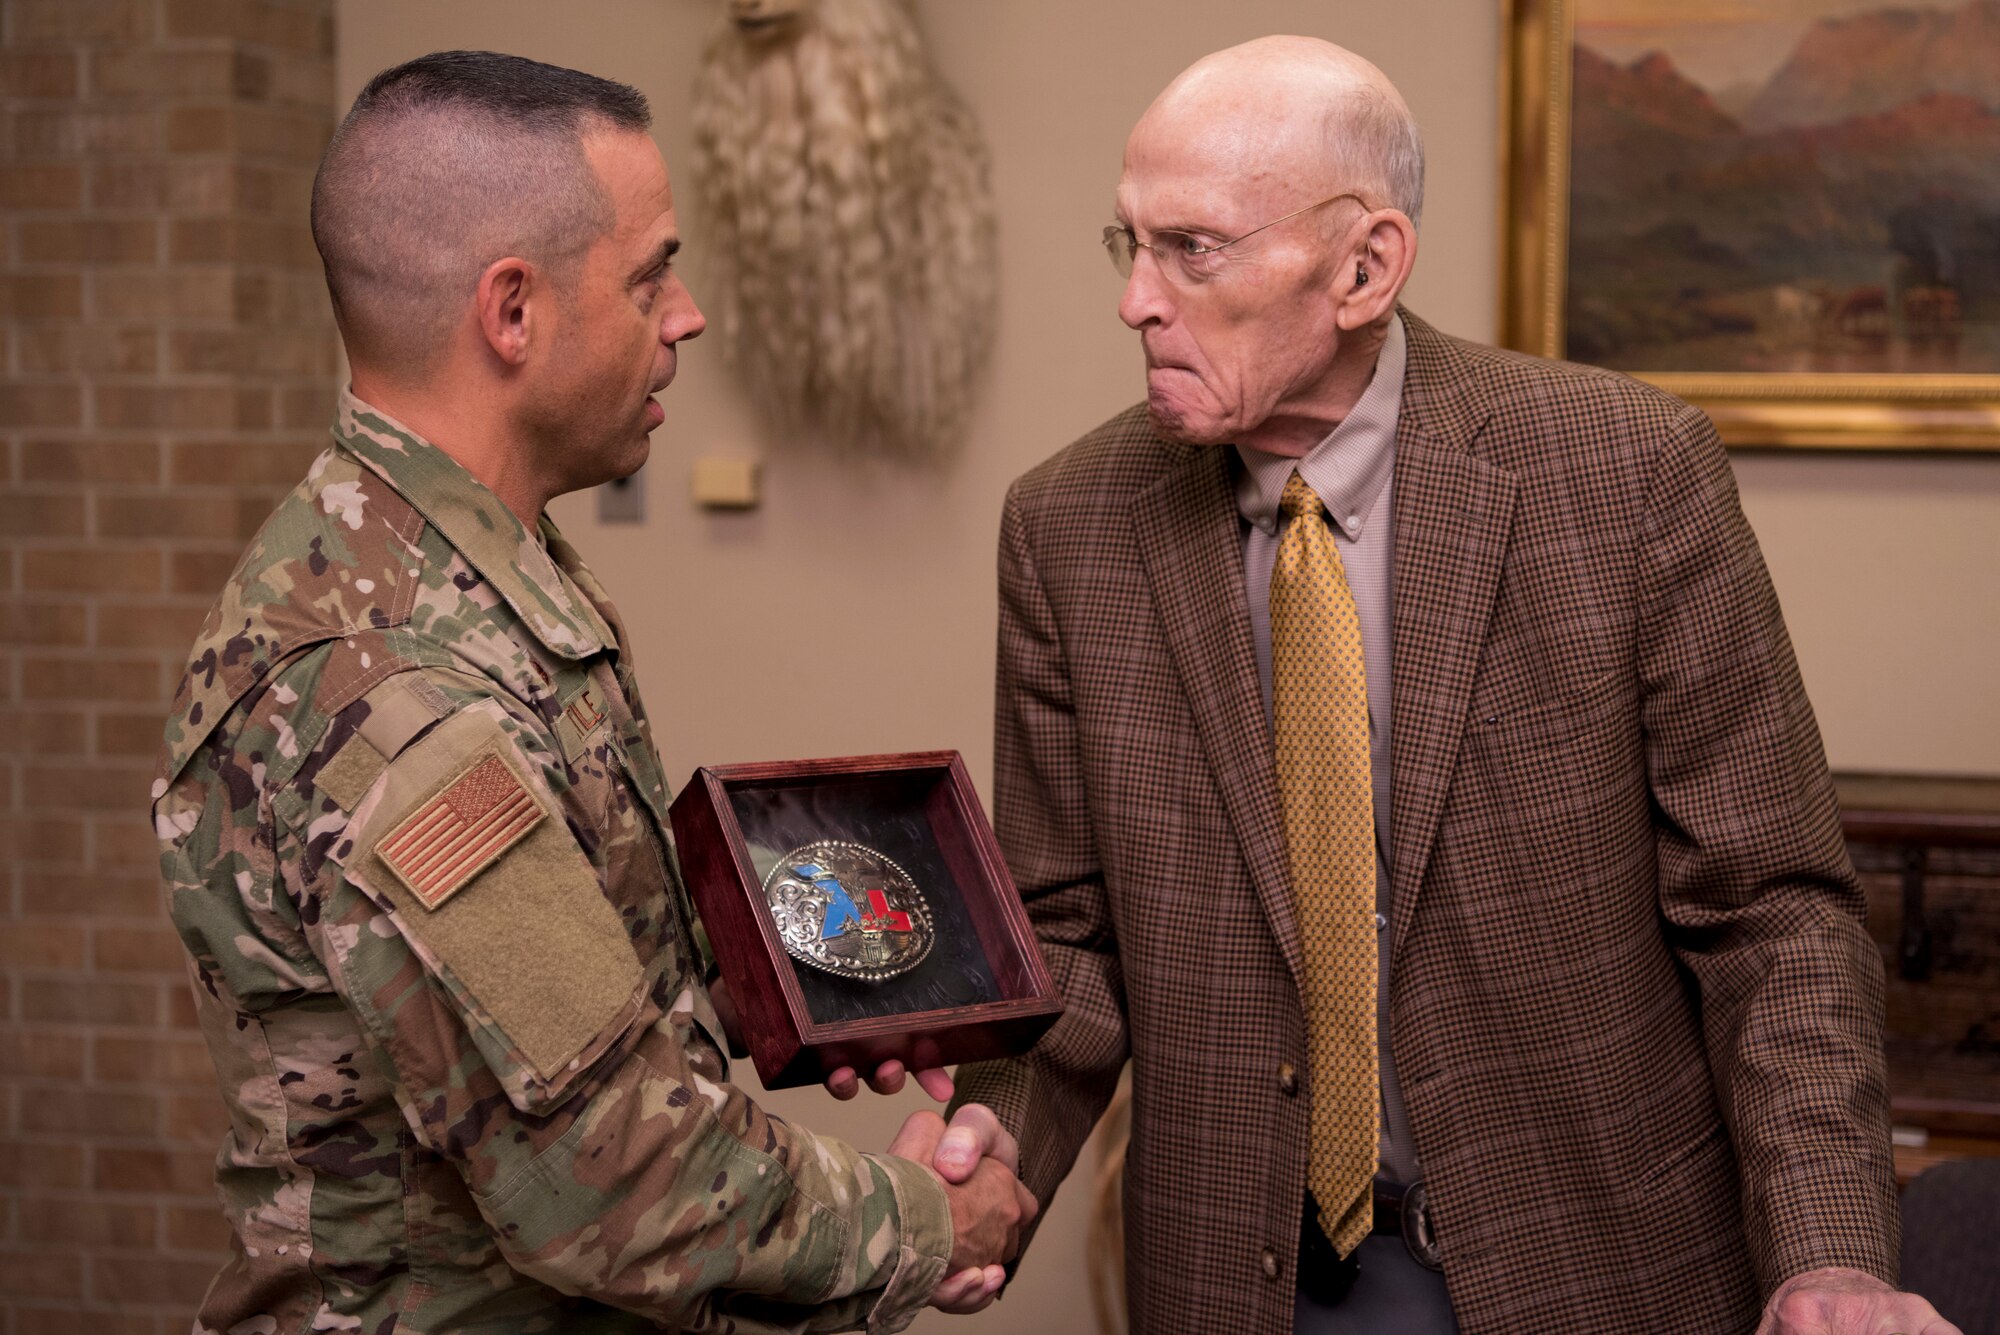 Bill Cauthorn, lifelong honorary commander, receives a custom Laughlin belt buckle from Col. Lee Gentile, 47th Flying Training Wing commander, in Del Rio, Texas, Oct. 15, 2019. Cauthorn is the CEO of The Bank and Trust, and has been a lifelong supporter of Laughlin Air Force Base. (U.S. Air Force photo by Senior Airman Marco A. Gomez)